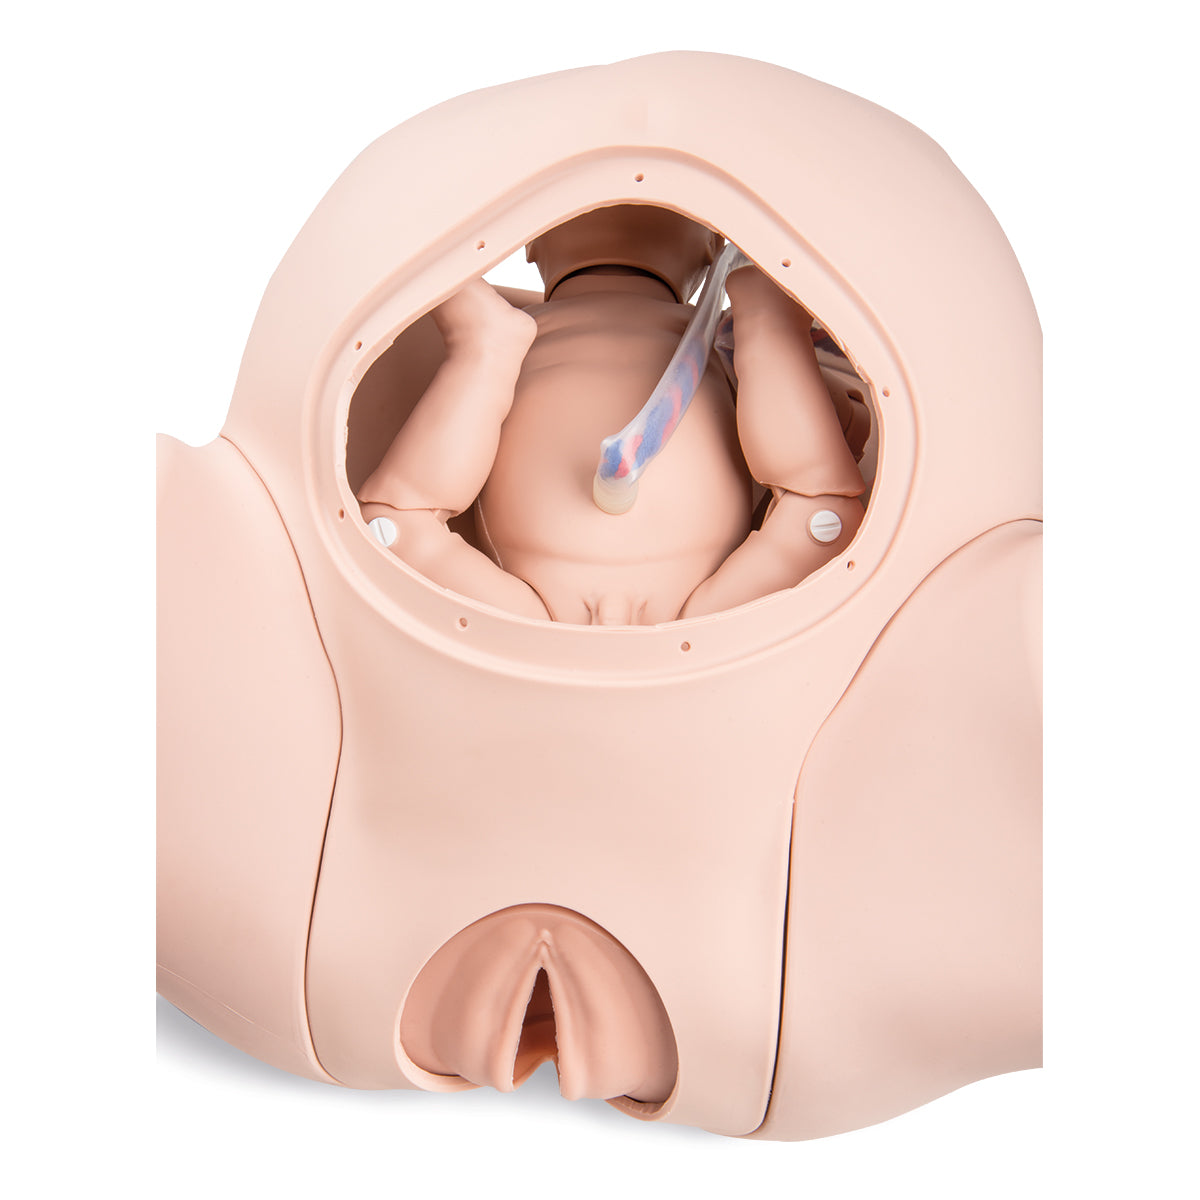 Practical birth simulator PRO targeted training in uncomplicated and complicated births etc